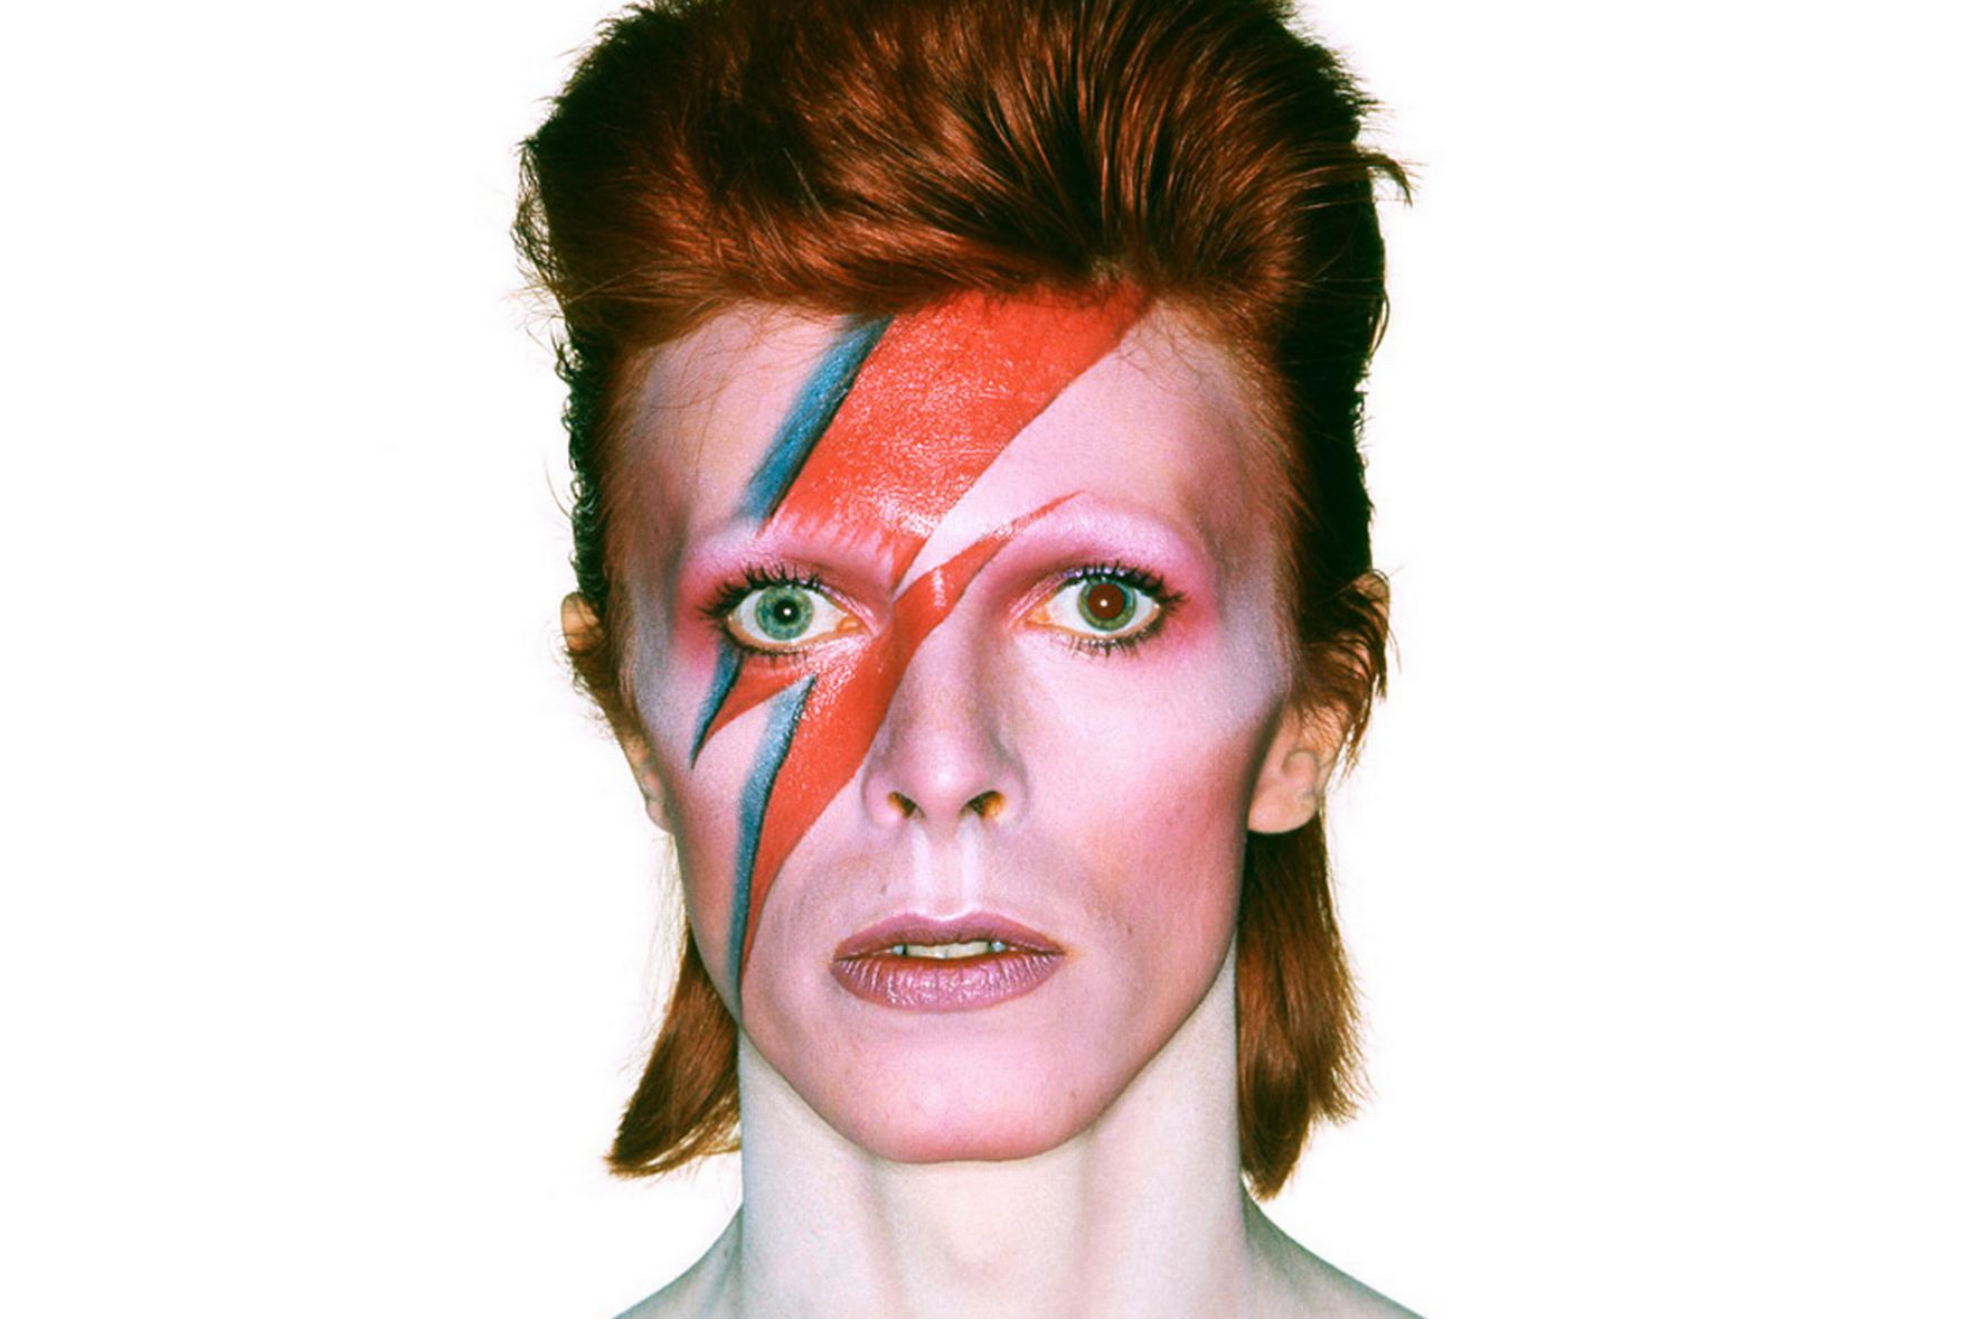 Why did David Bowie have different colored eyes and lightning bolt makeup?